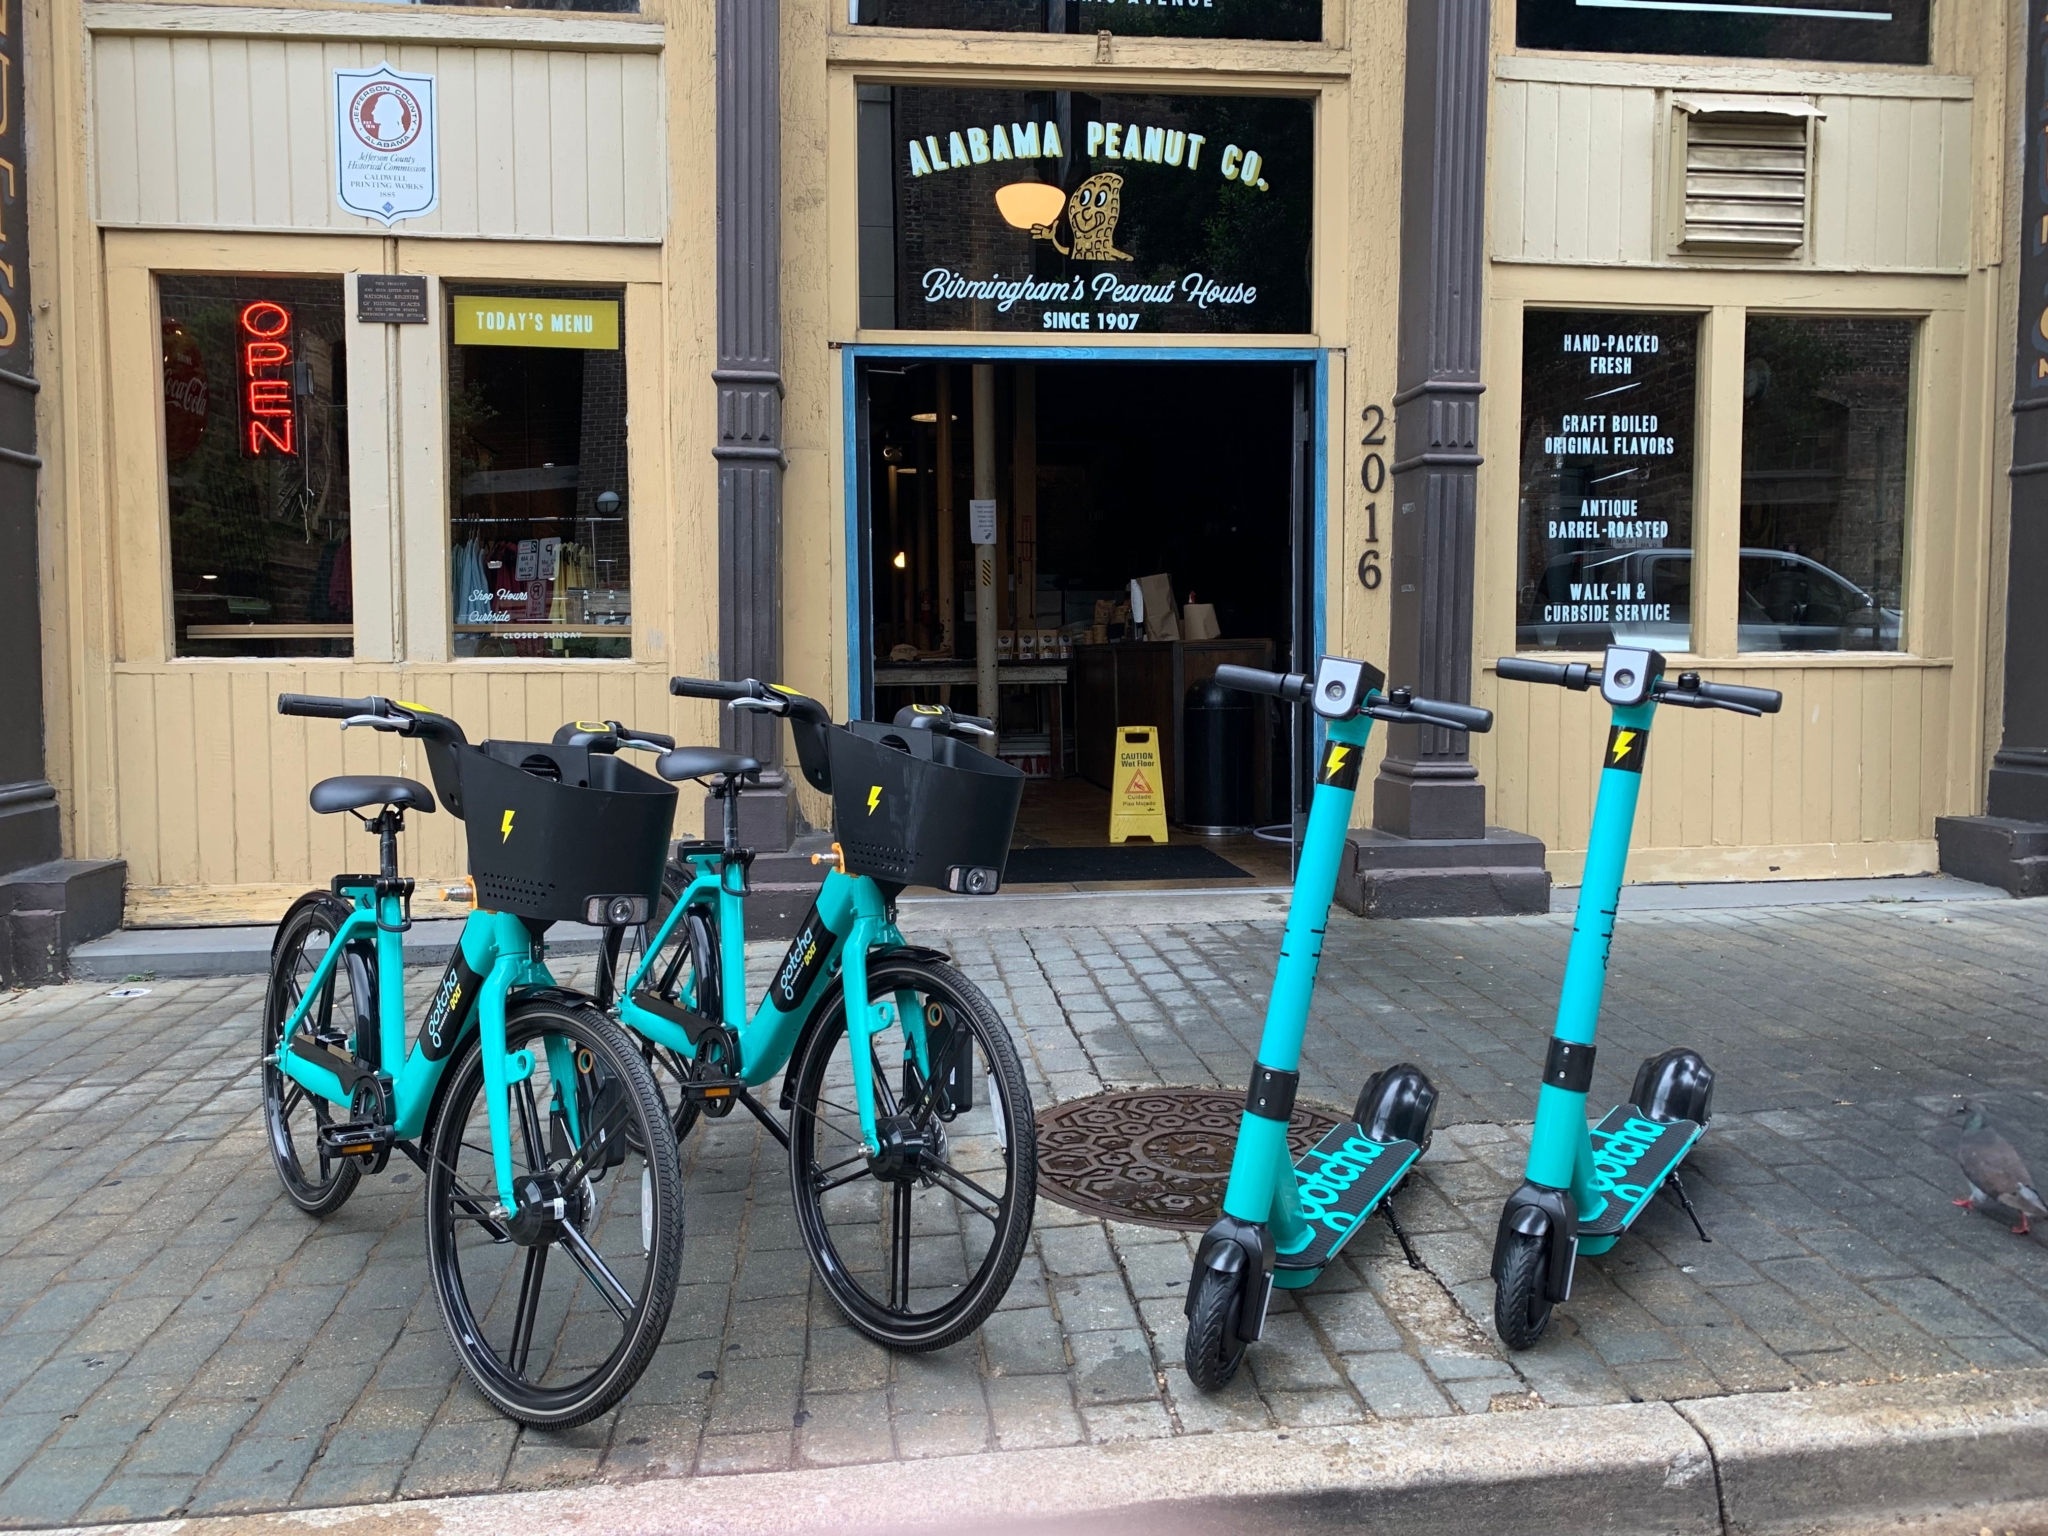 Bolt bikes and scooters will be on the streets of Birmingham soon! Photo via City of Birmingham